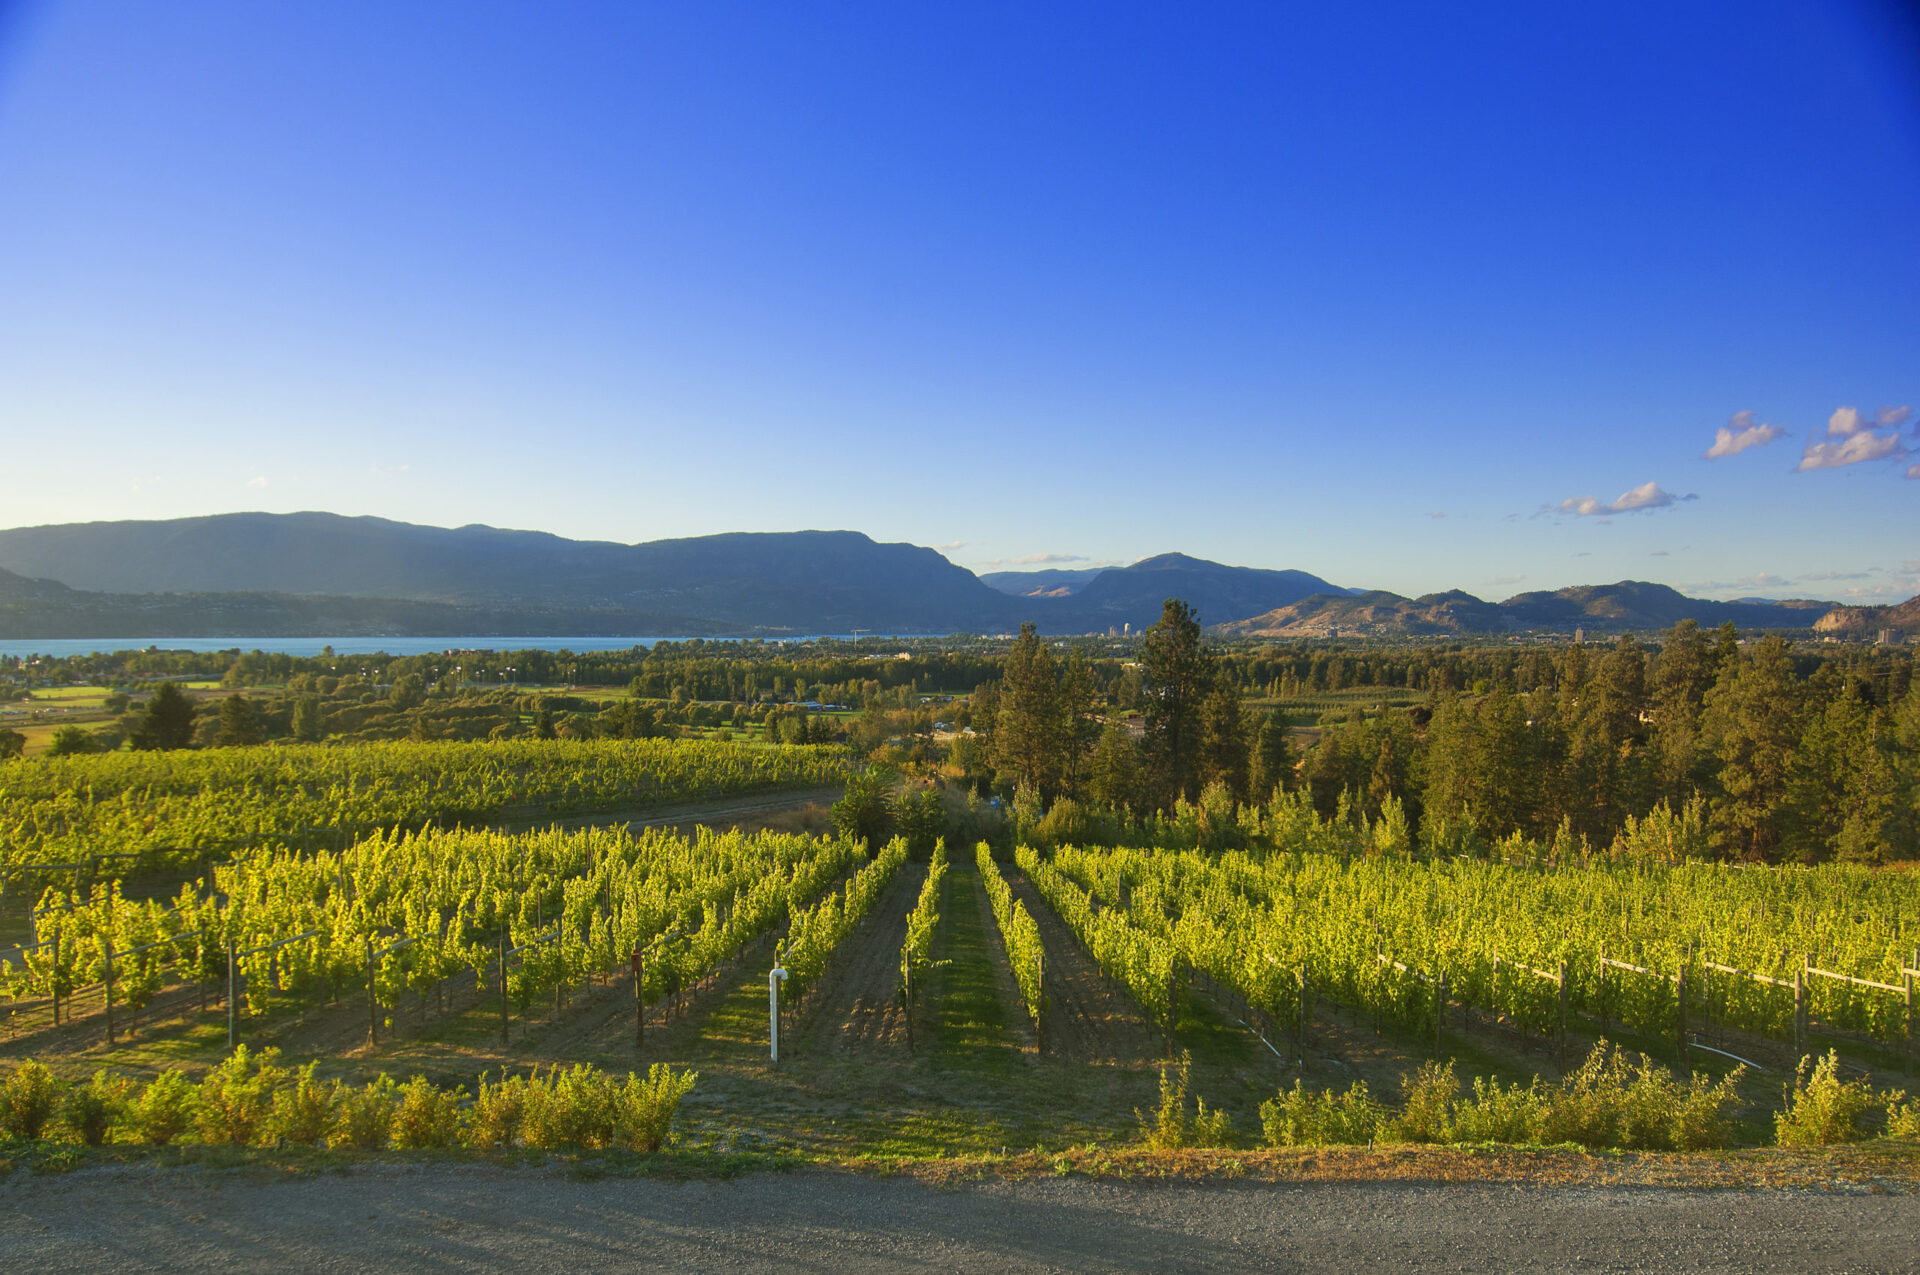 Tantalus Vineyards, located in northern British Columbia experienced one of its toughest vintages in 2021 / Tantalus Vineyards